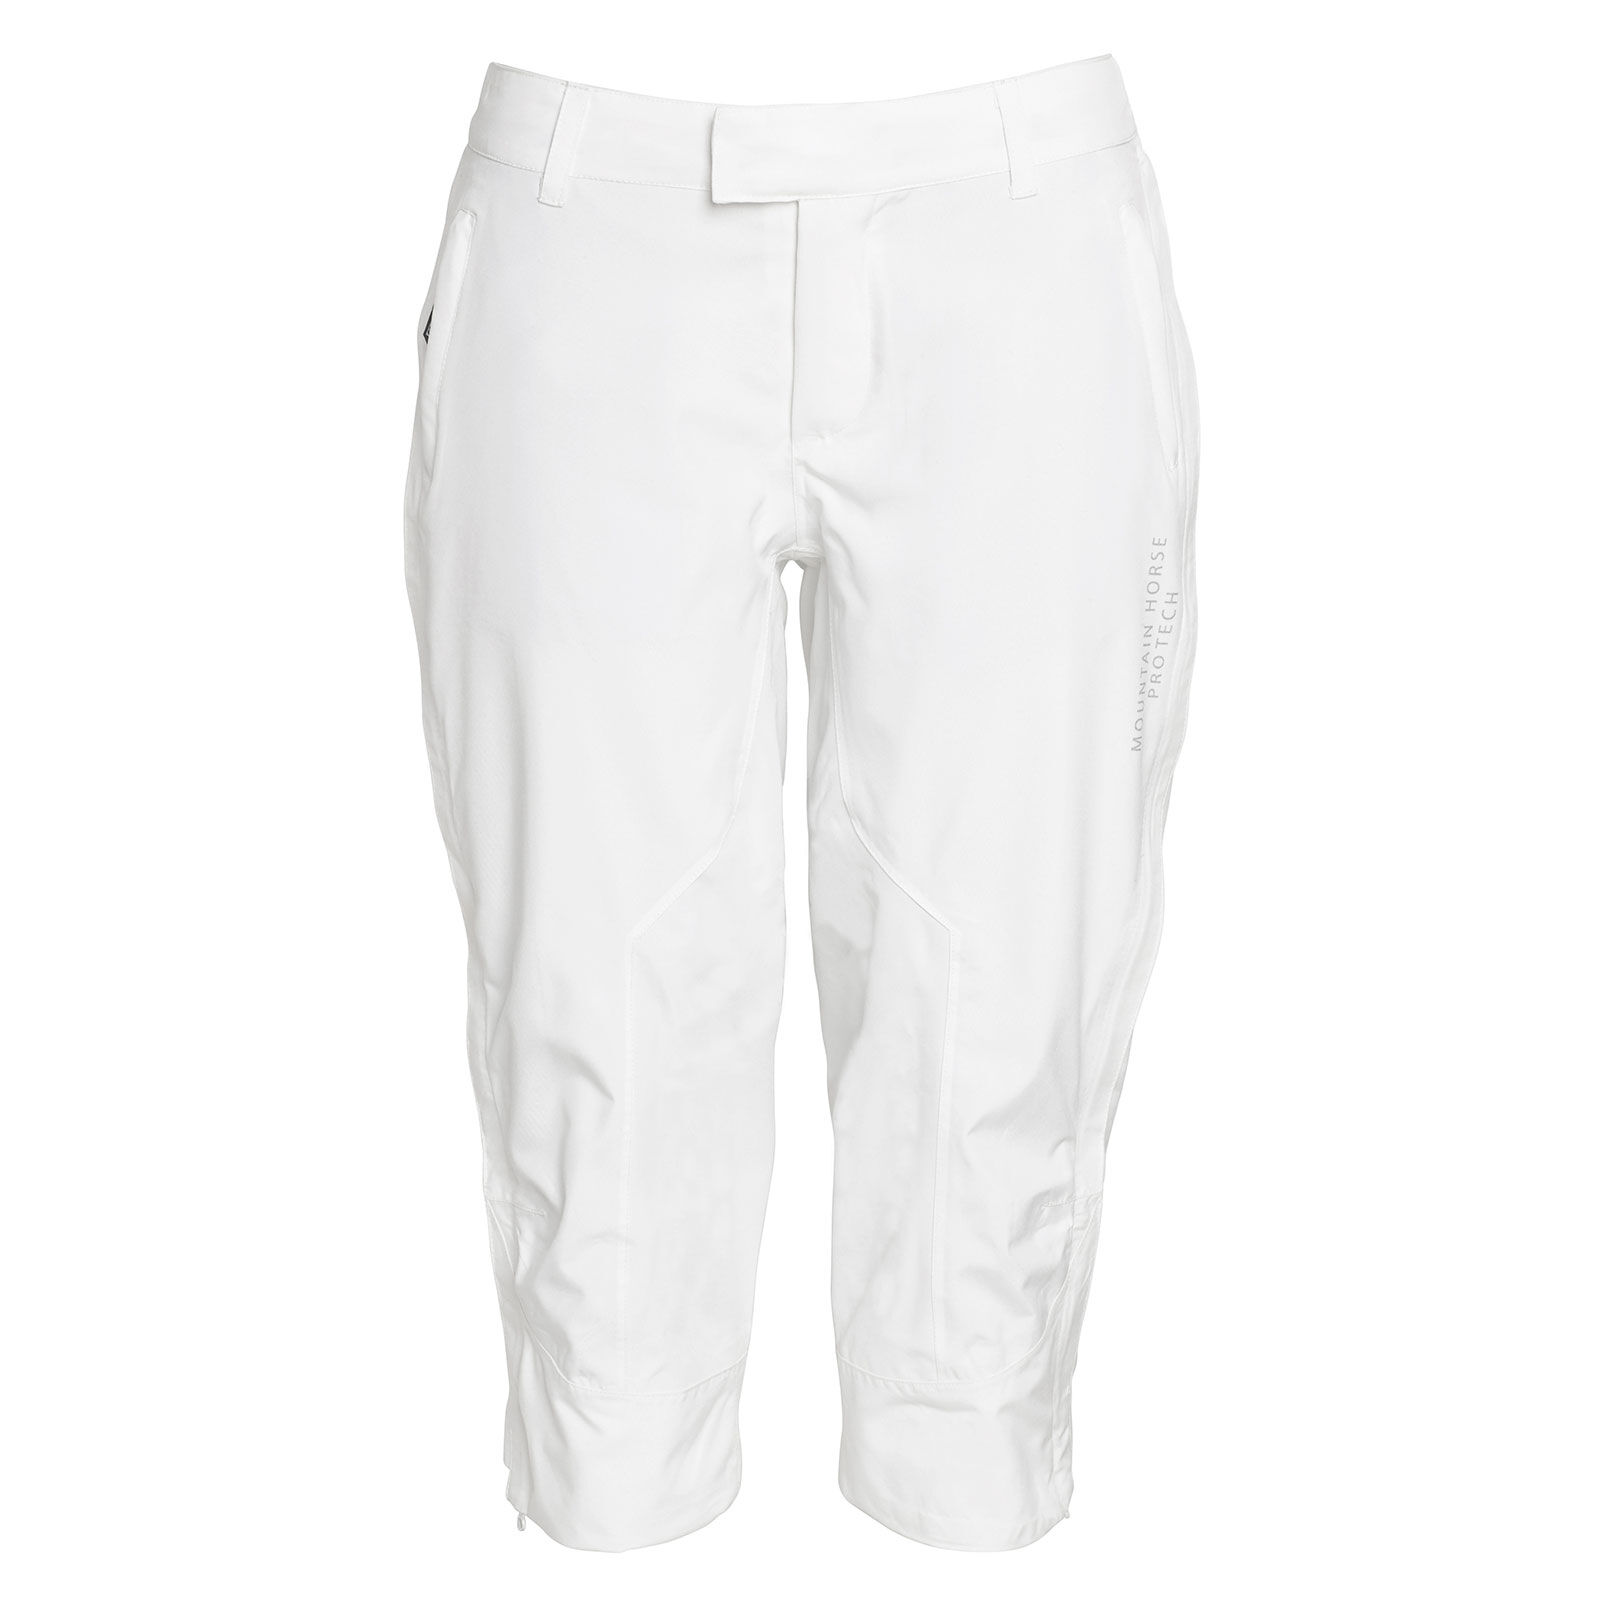 Outdoor Research Allies Mountain Pant 3 Layer Gore-tex